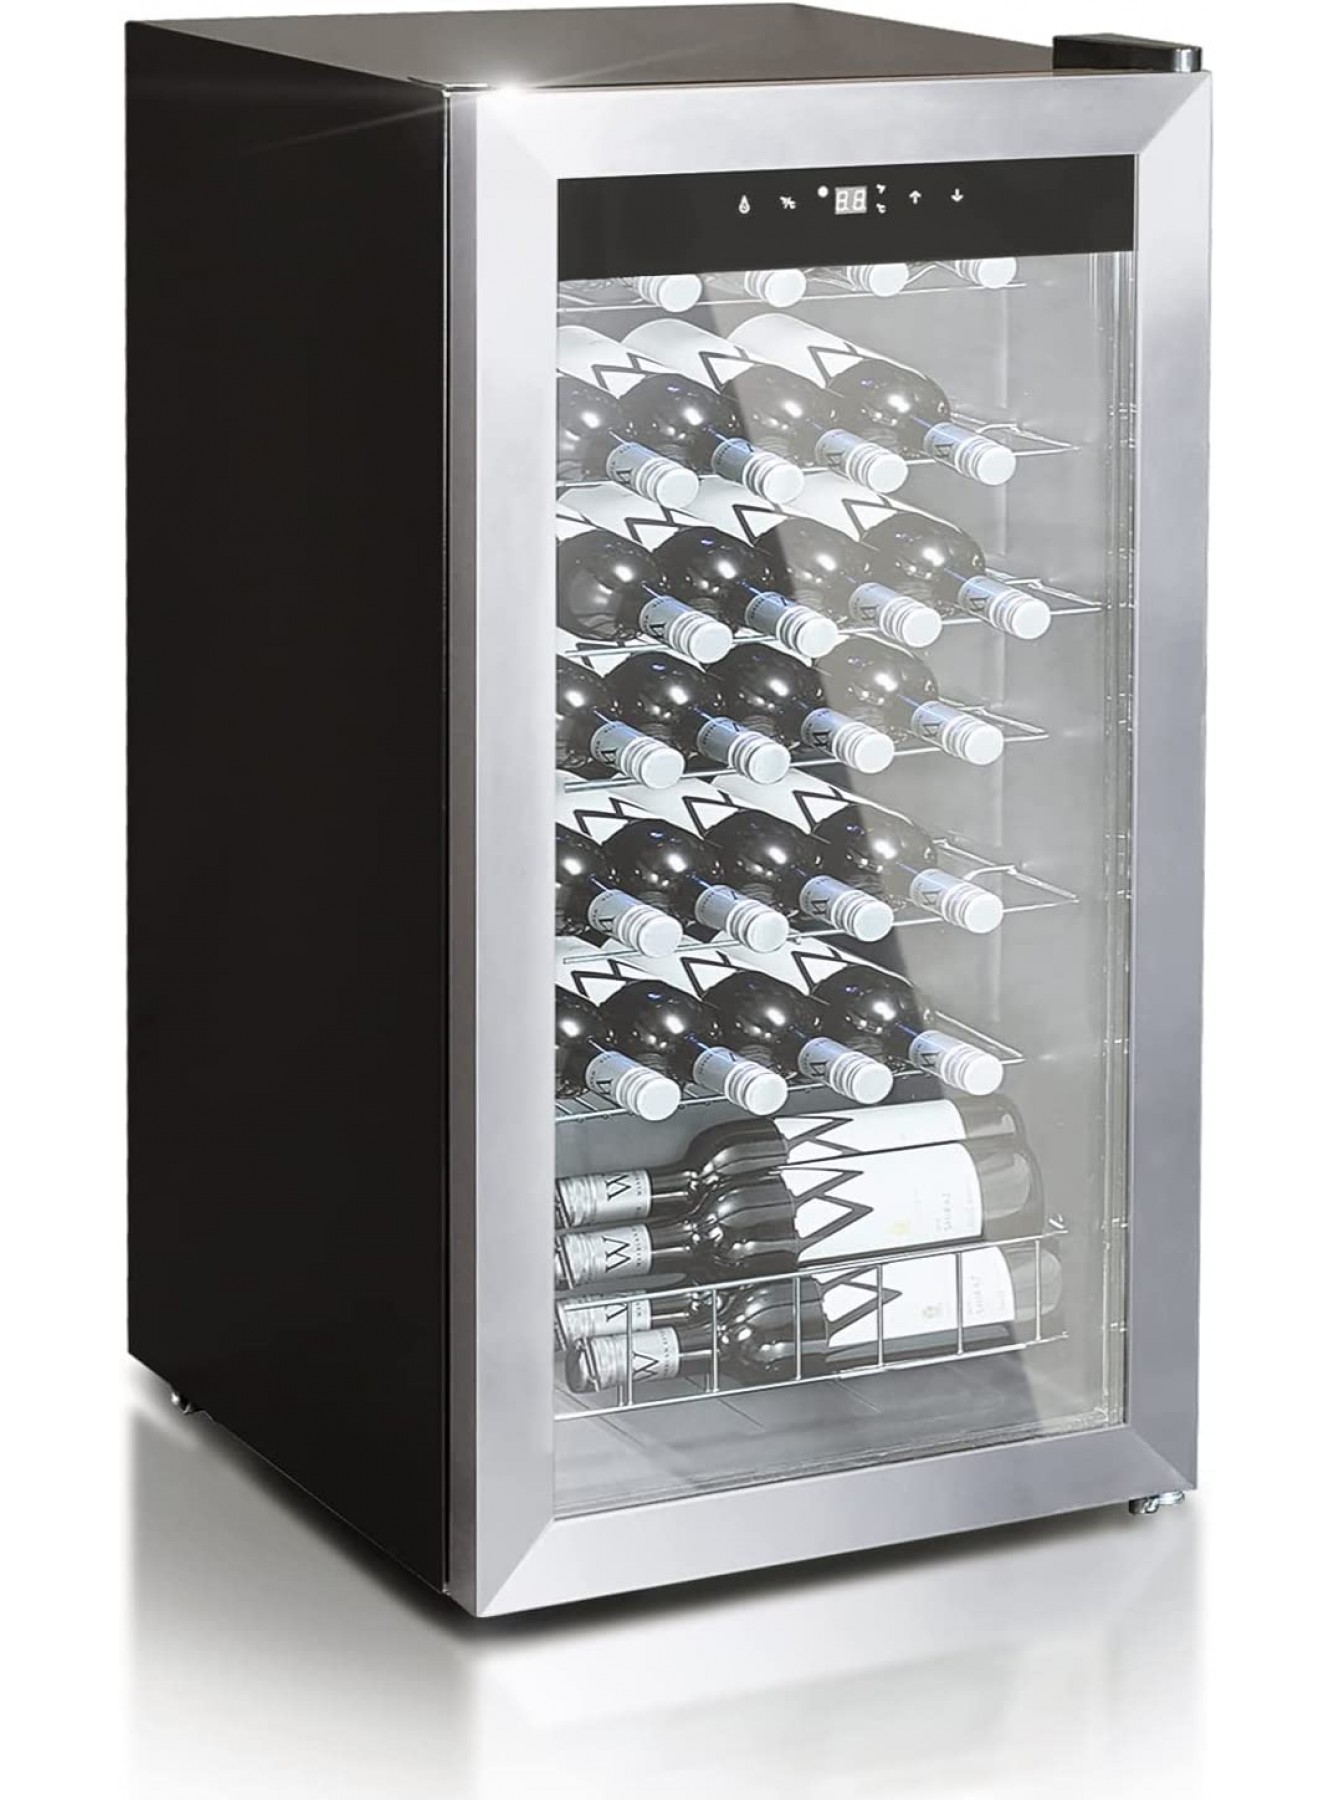 Smad 28 Bottle Compressor Wine Cooler Refrigerator Quiet Operation | Large Freestanding Wine Cellar | 39 f-65 f Digital Temperature Control Wine Fridge For Red White Champagne or Sparkling Wine Stainless Steel & Black B09Z6MBCFN